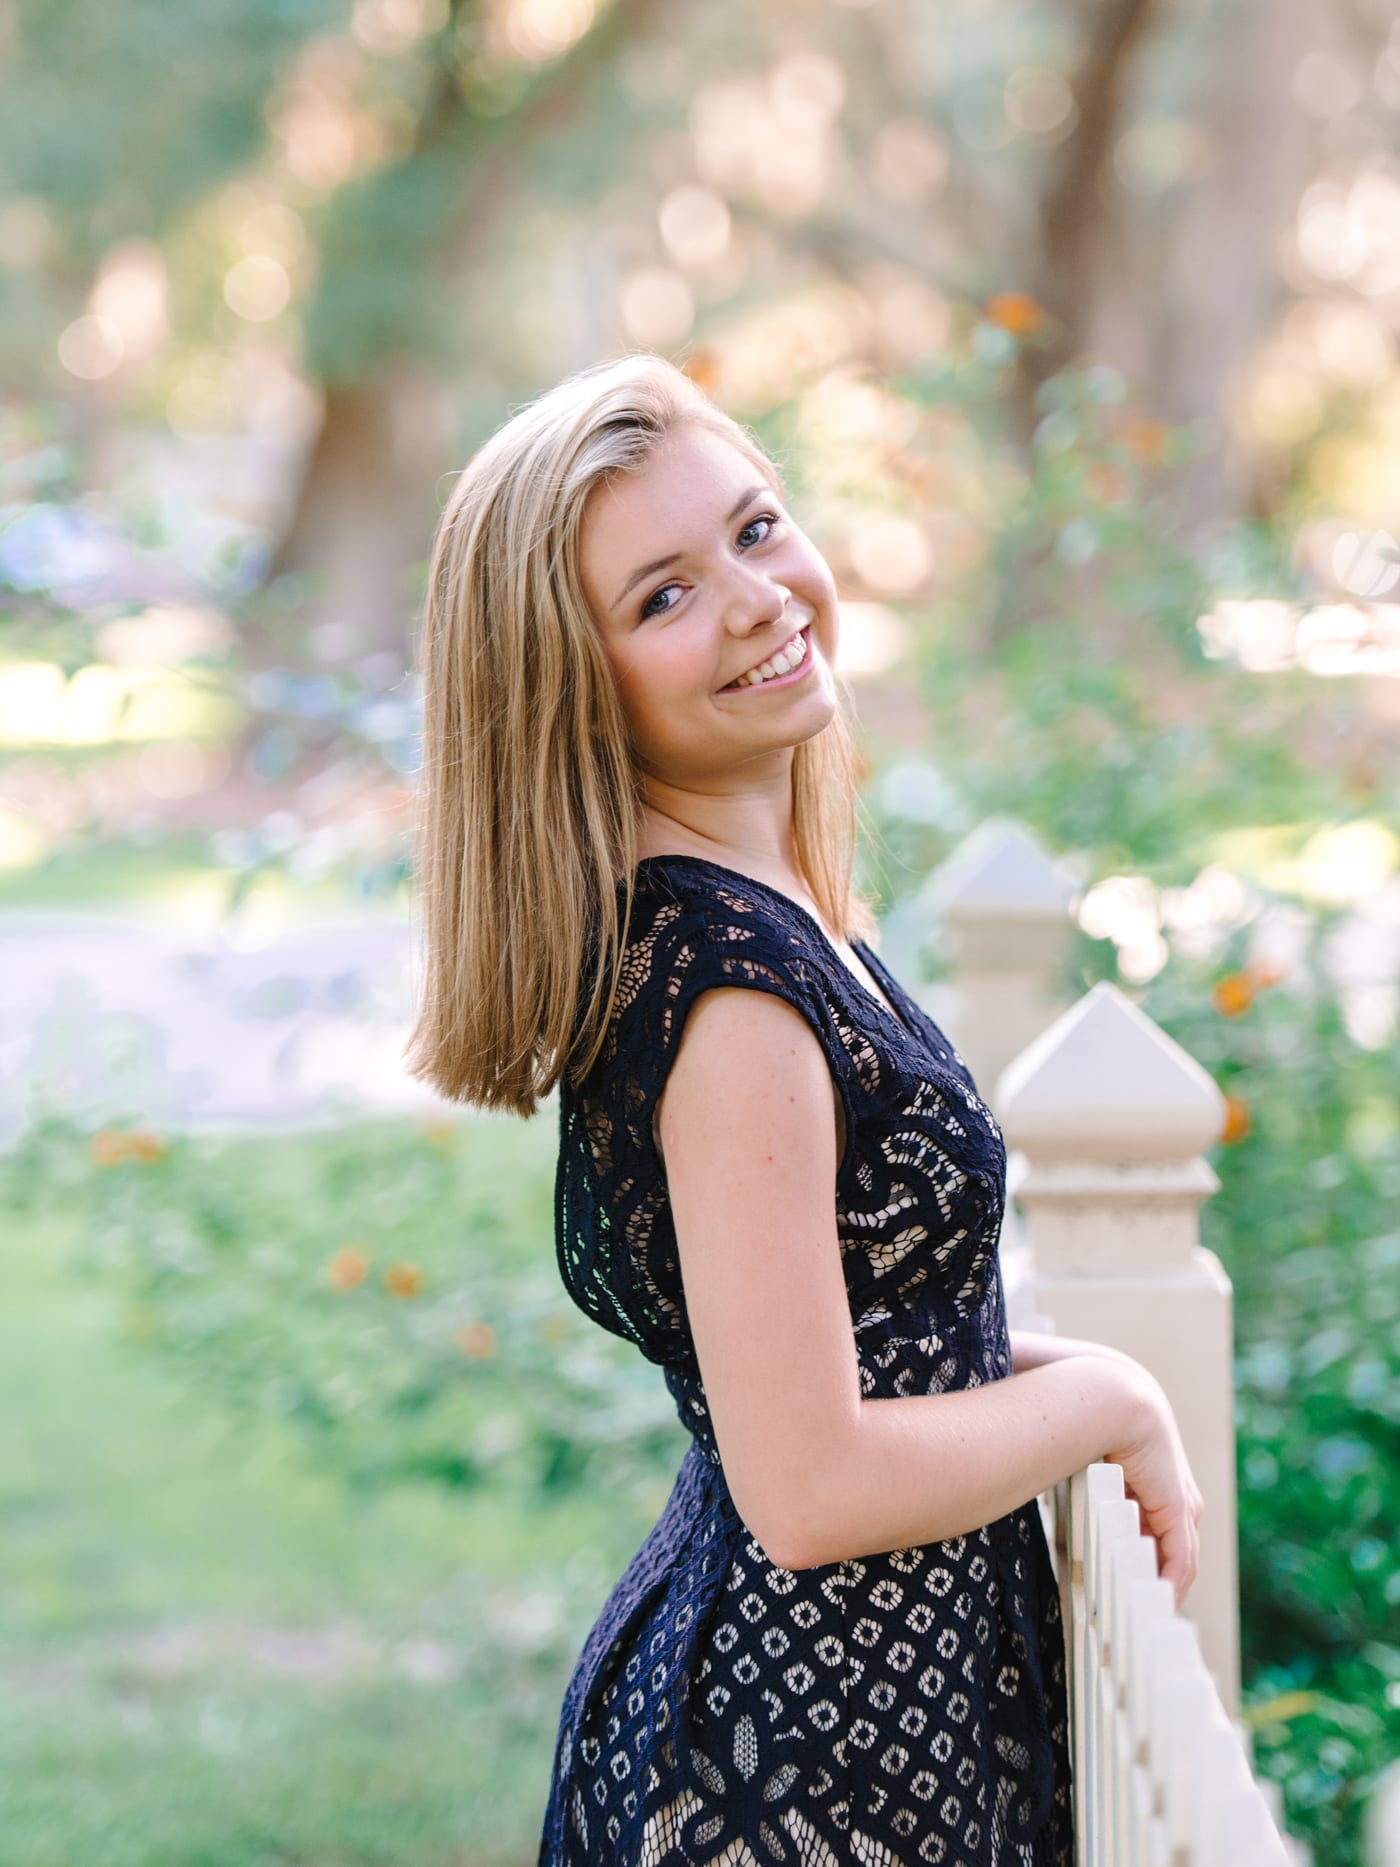 Senior Pictures in Myrtle Beach and Charleston SC | High School Senior Photography Ideas for Girls in South Carolina 